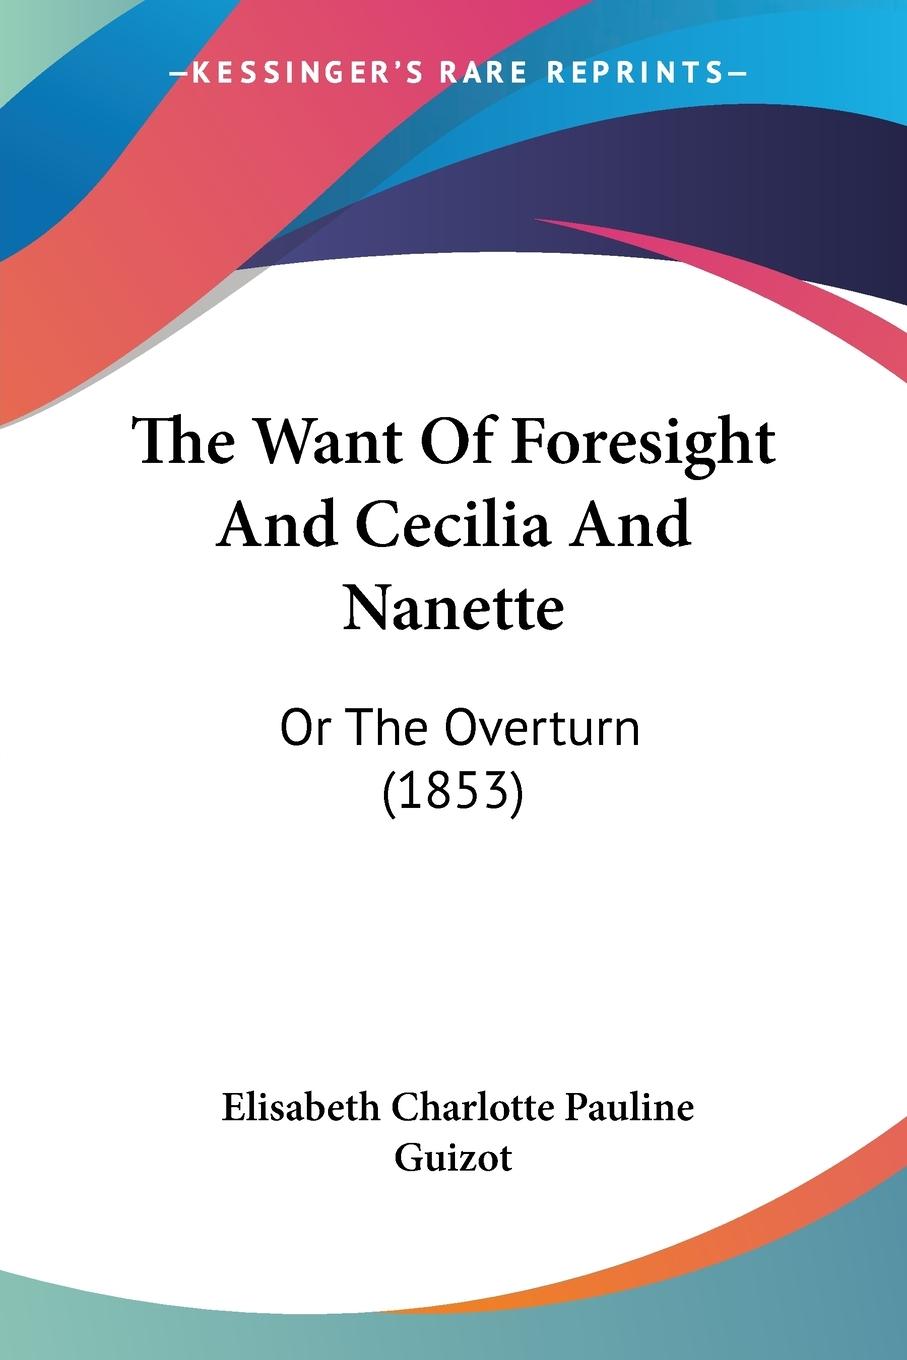 The Want Of Foresight And Cecilia And Nanette - Guizot, Elisabeth Charlotte Pauline